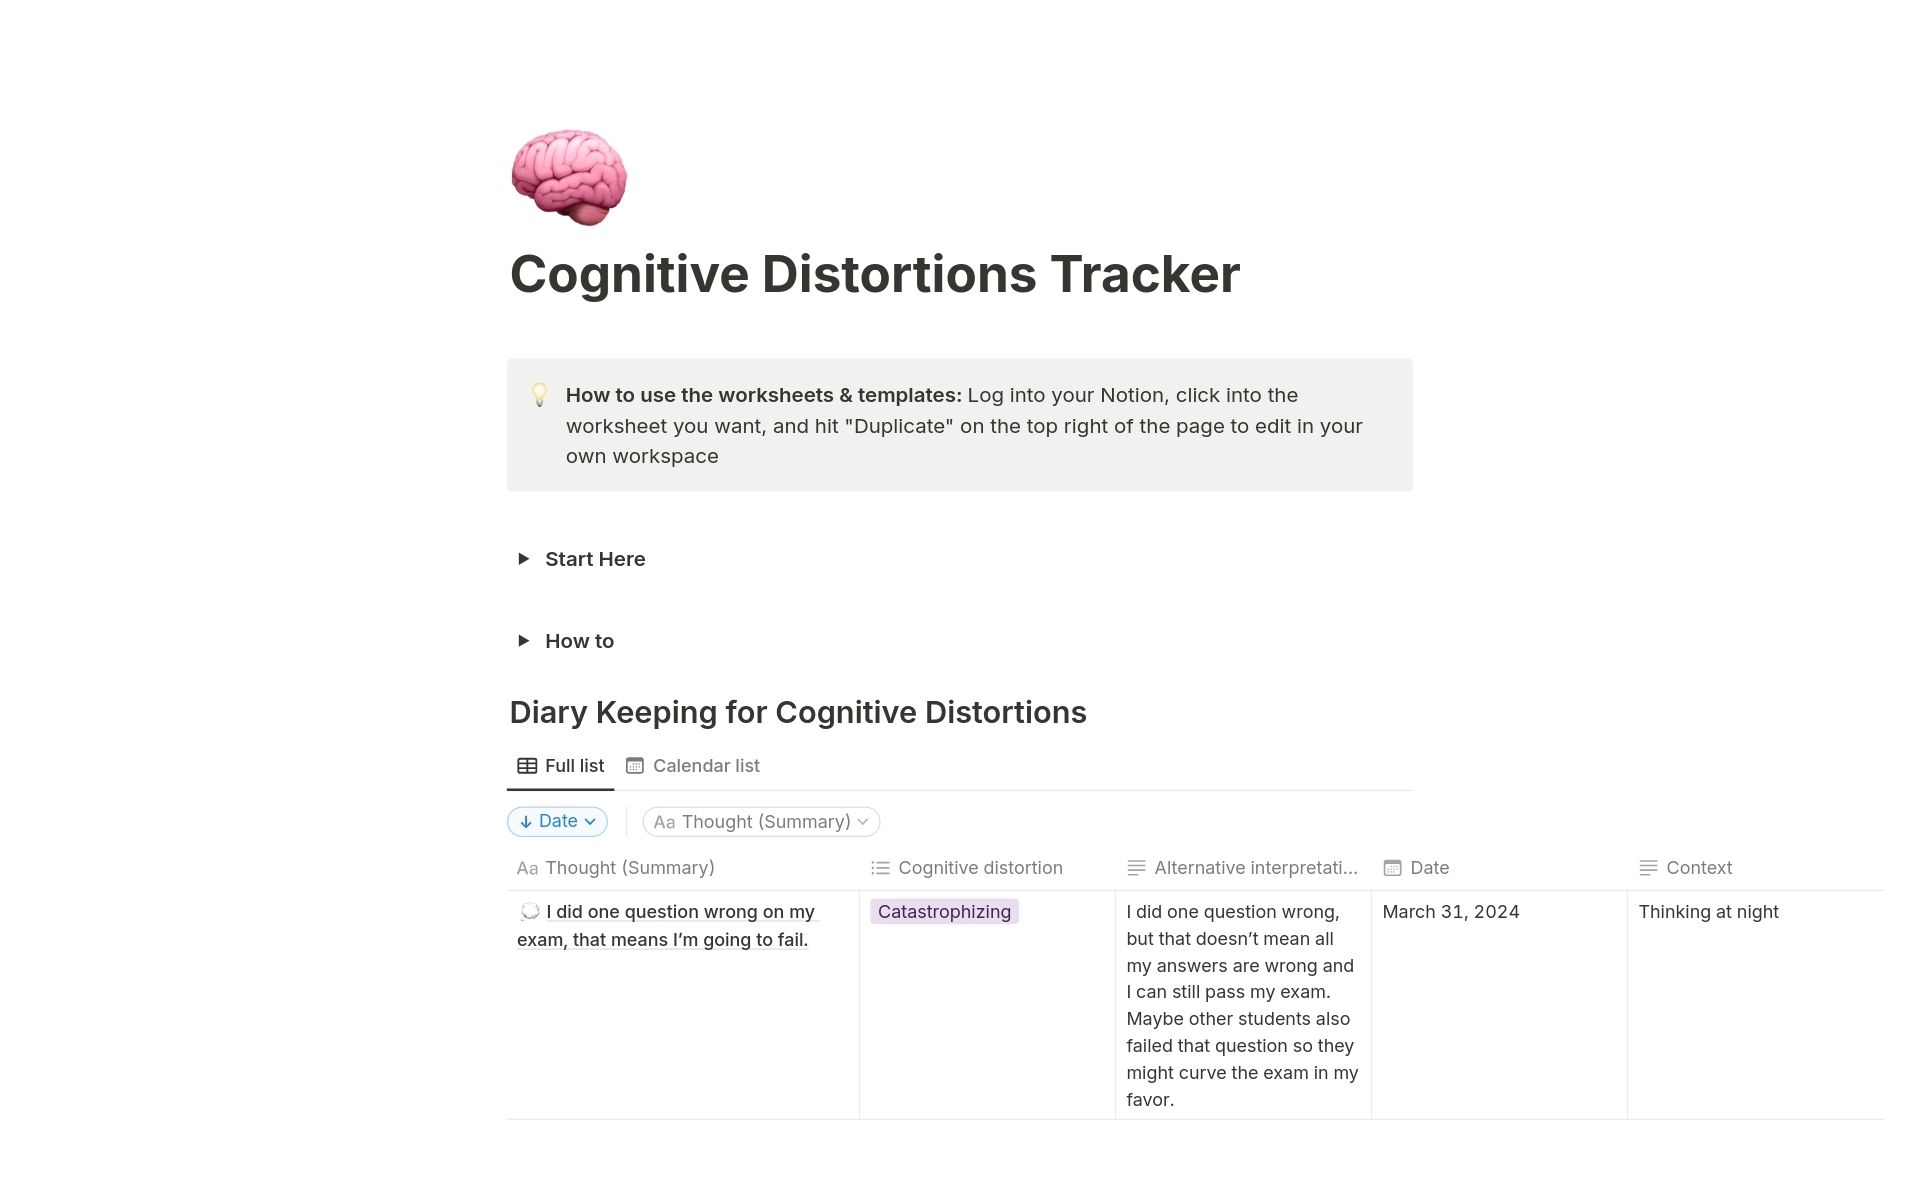 Do you feel overwhelmed by negative thoughts, and wish for a way to address them effectively?

This Notion template helps you to record your cognitive distortions, categorize them, and delve into analyzing patterns that influence your thinking.